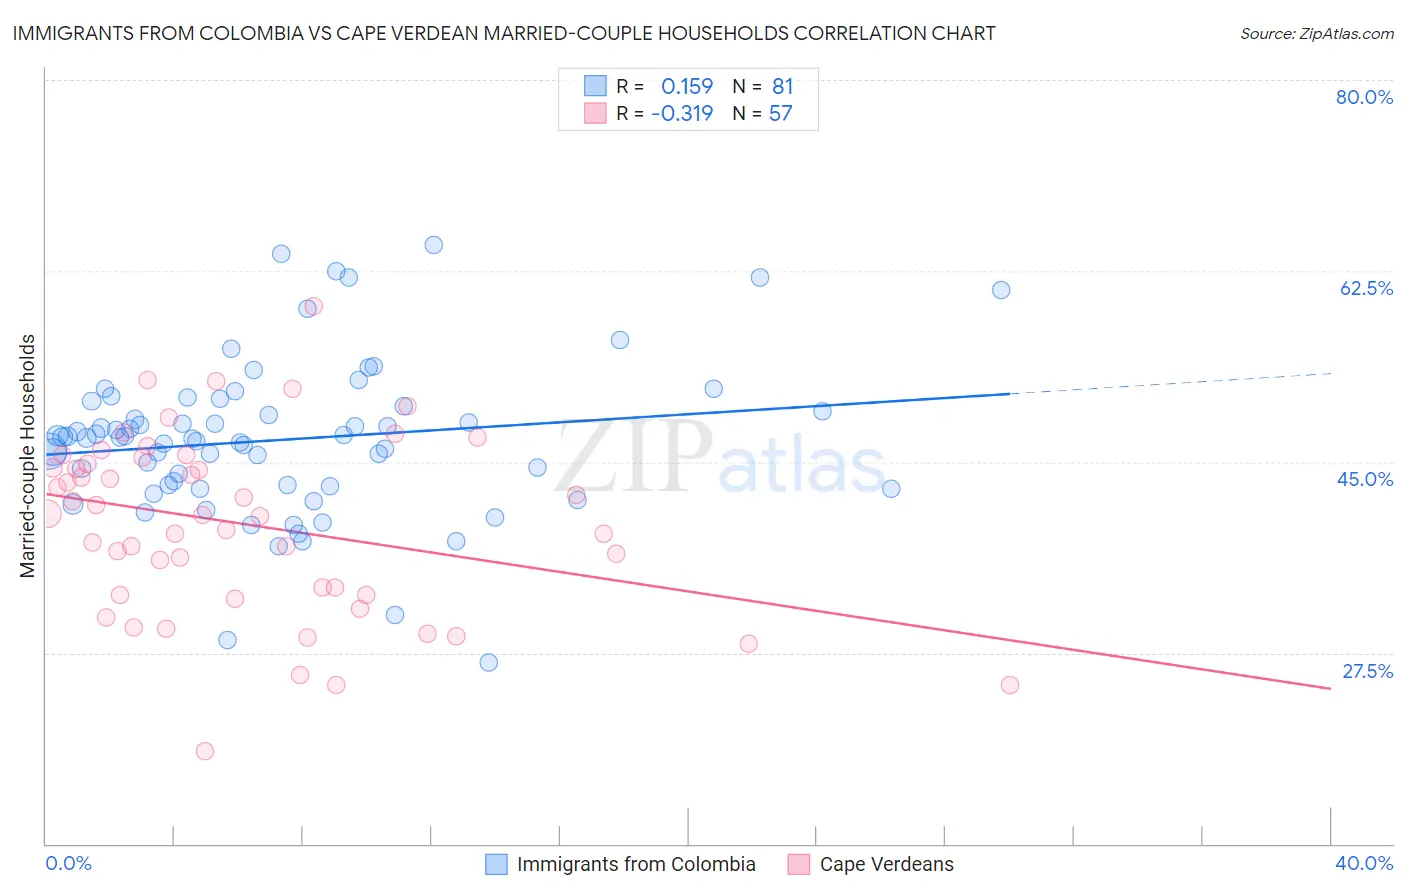 Immigrants from Colombia vs Cape Verdean Married-couple Households